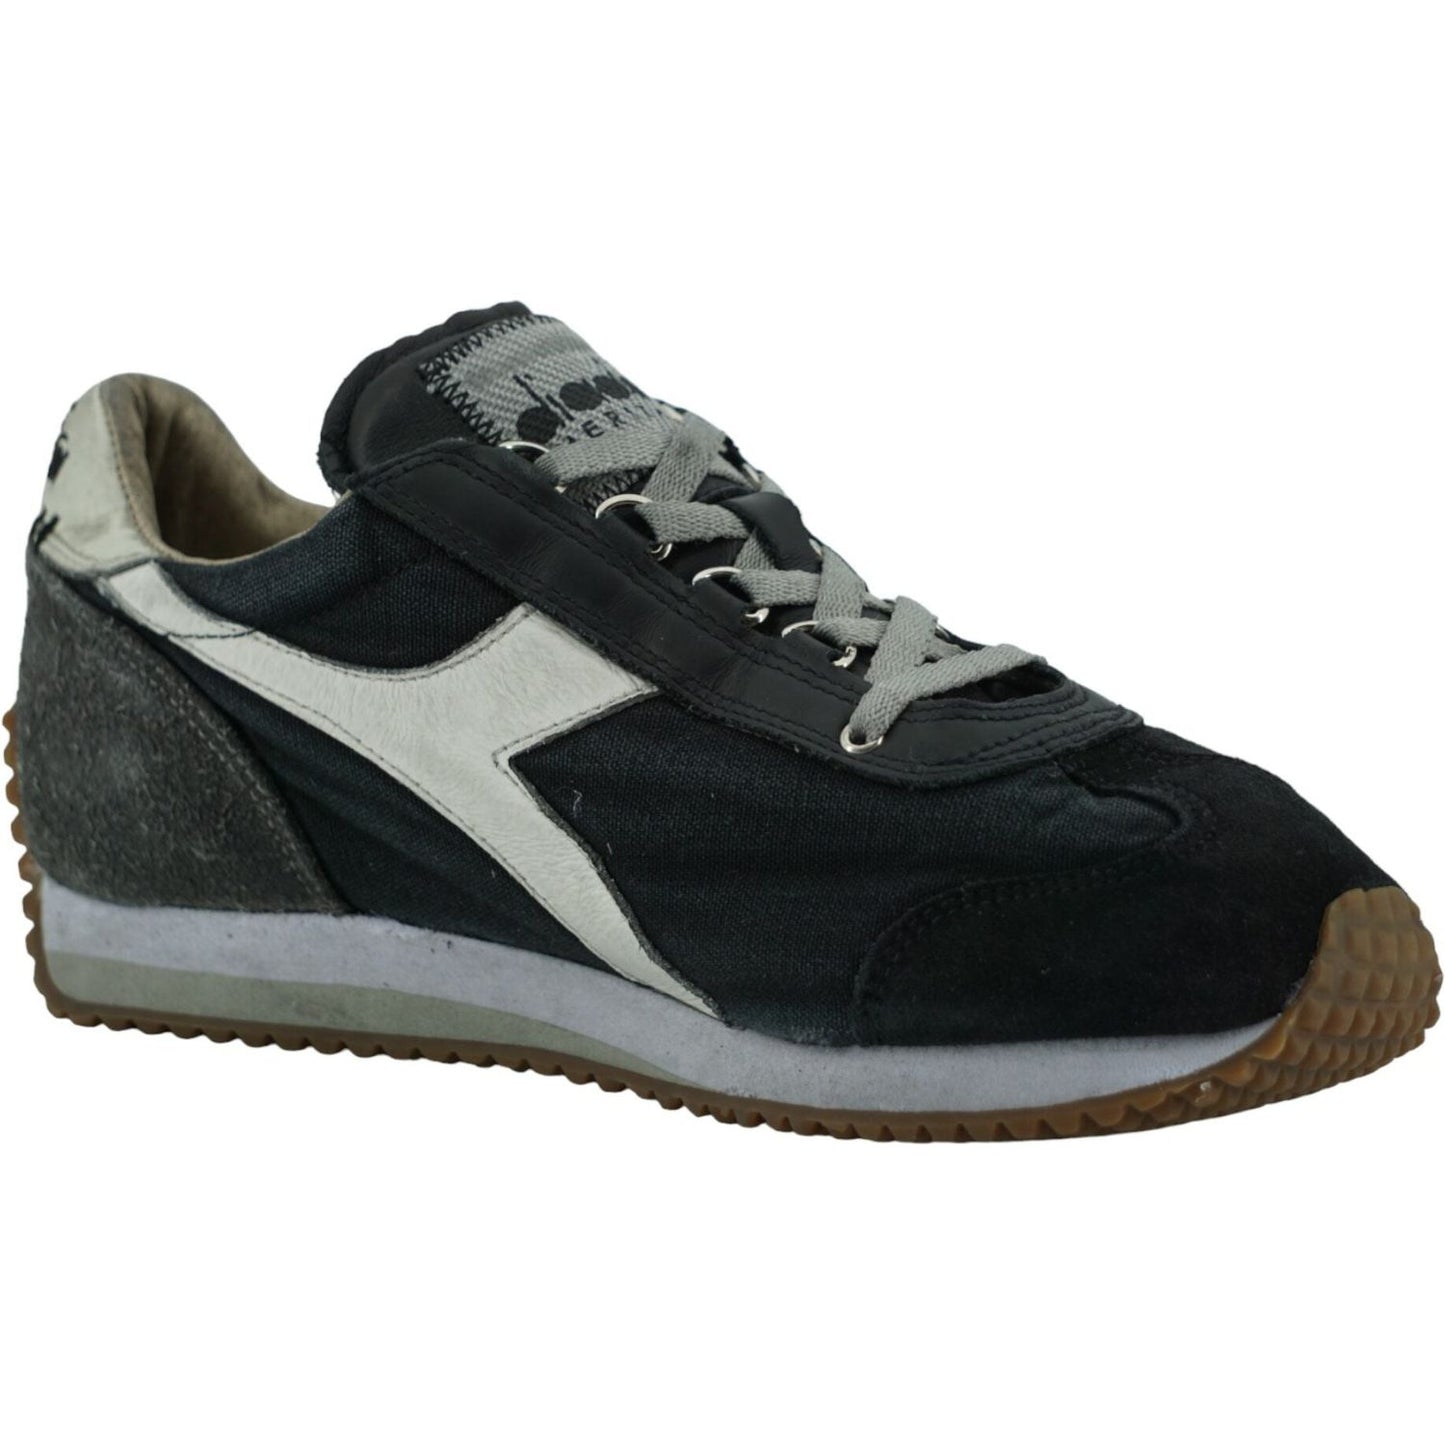 Diadora Black and Gray Equipe H Dirty Stone Wash Evo Sneakers gray-equipe-h-dirty-stone-leather-sneakers-1